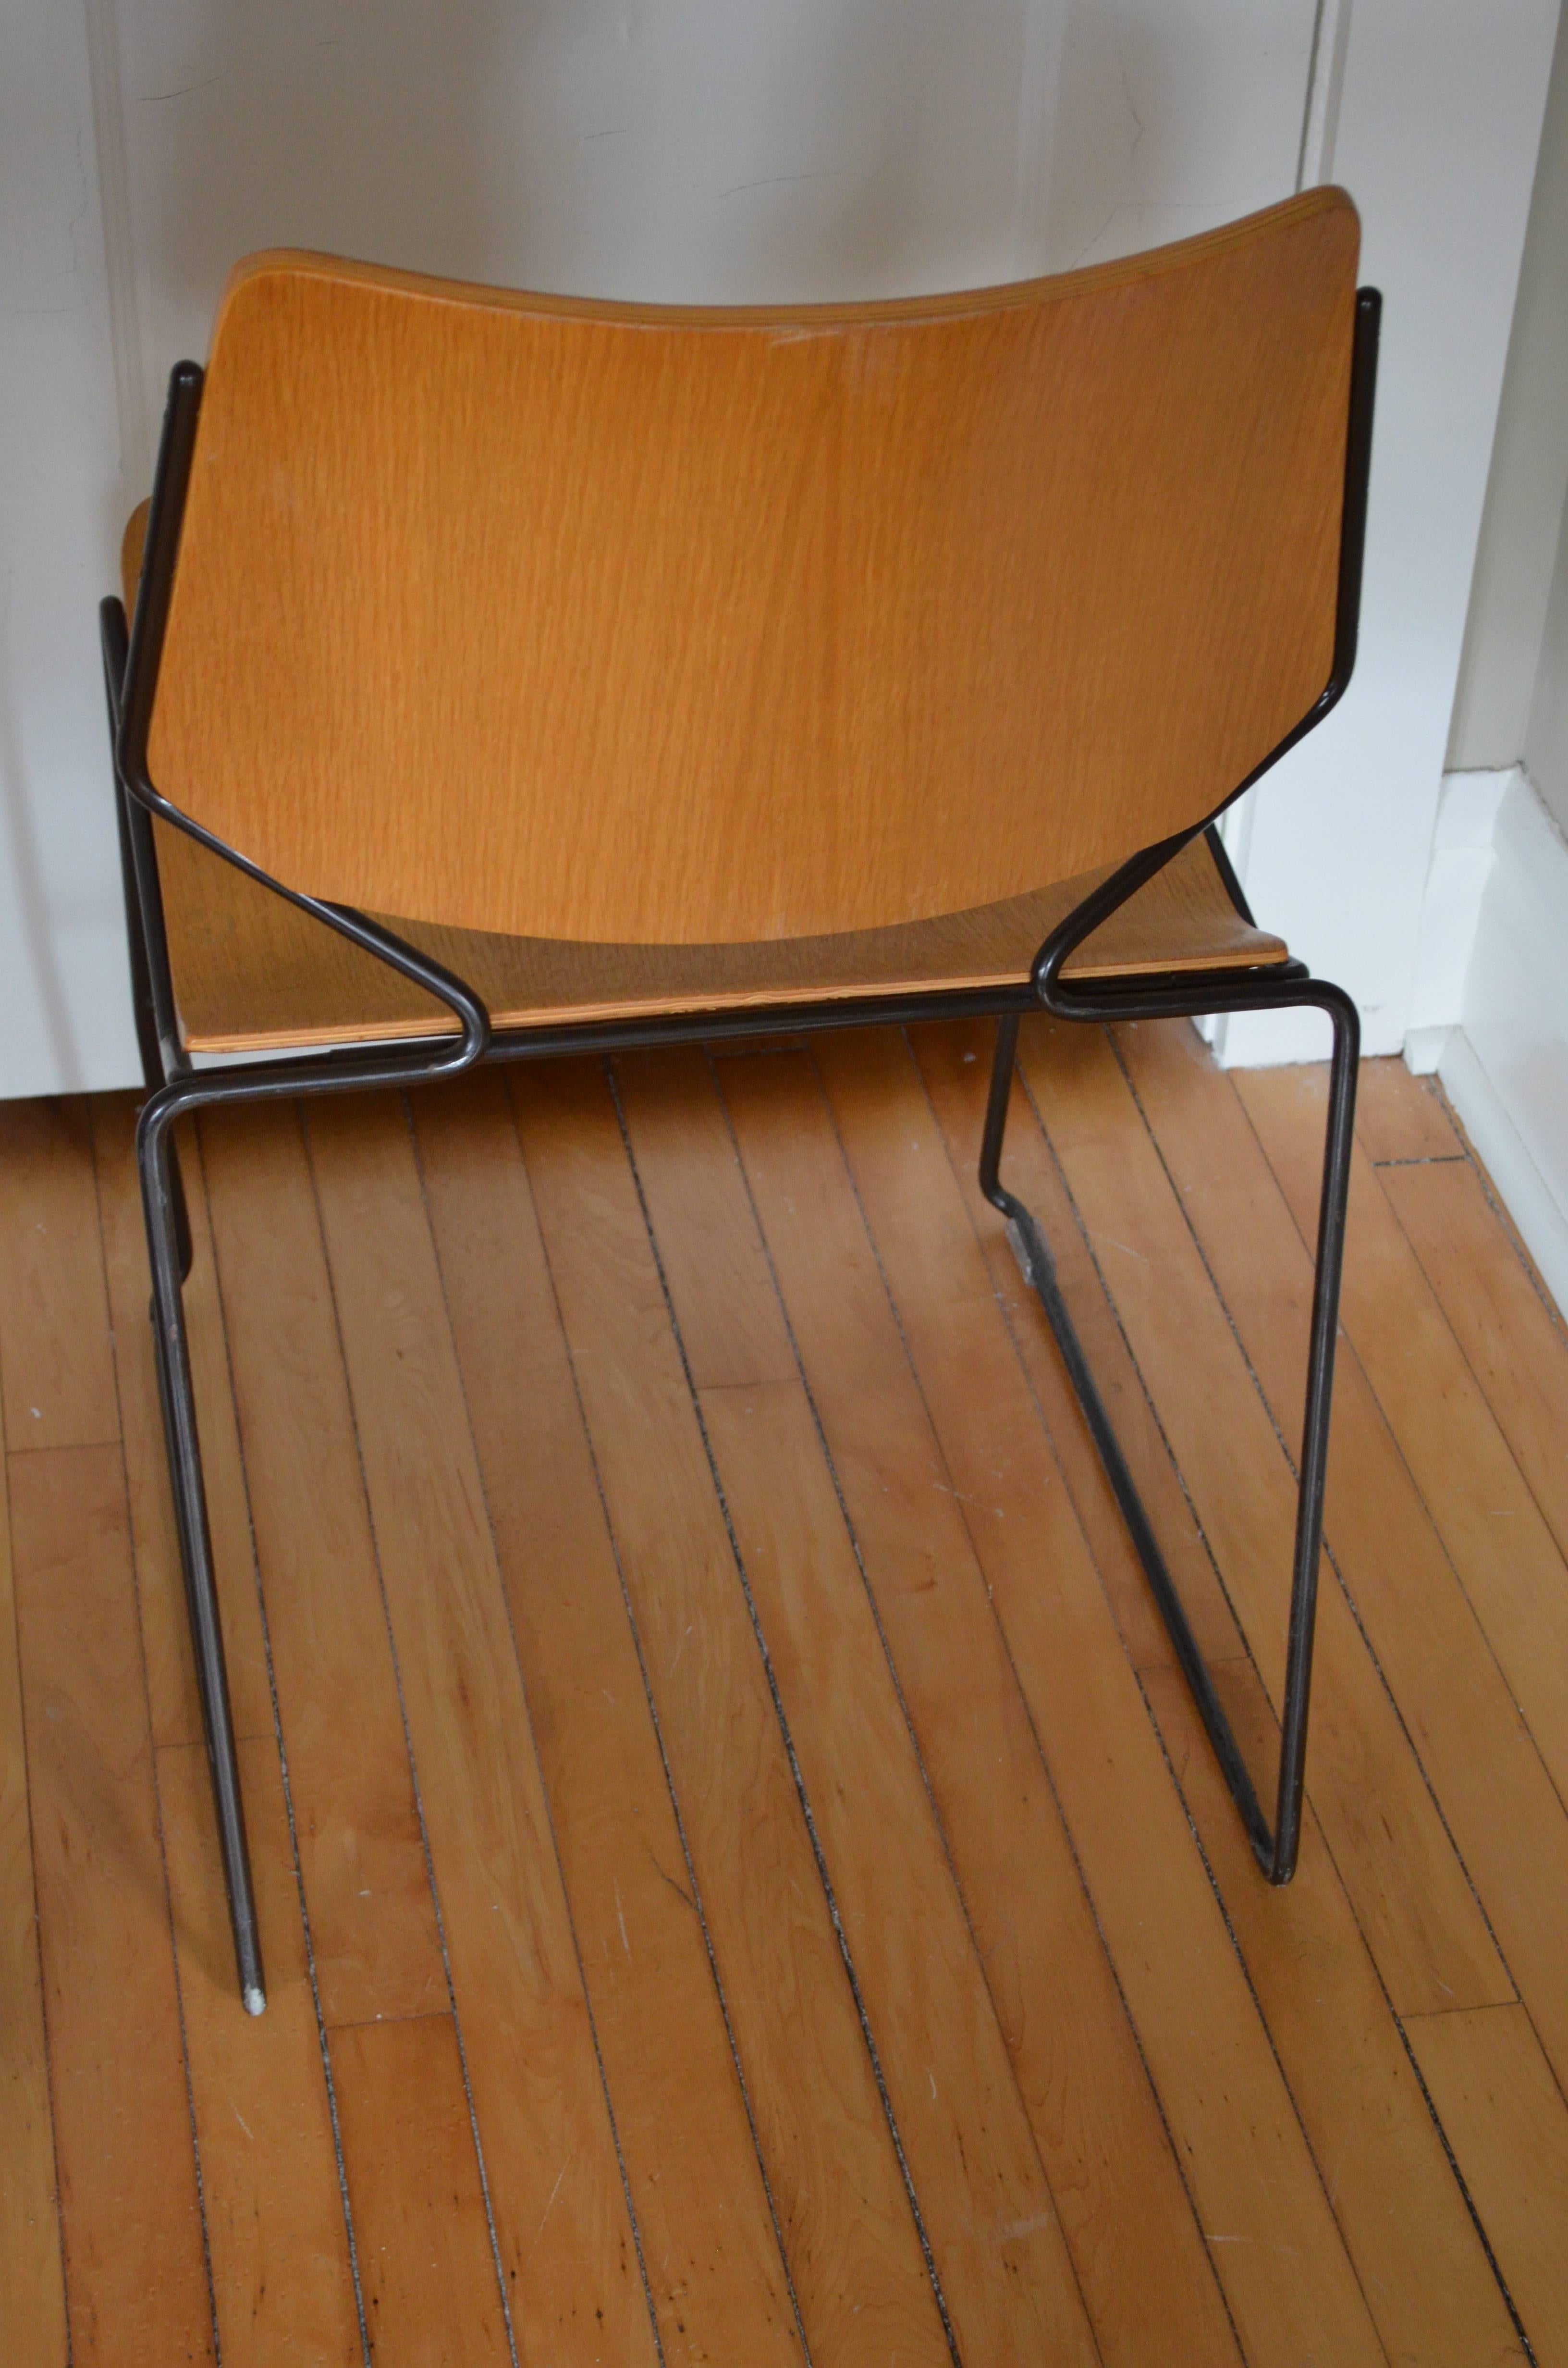 Late 20th Century Lot of 60 Vintage Dining Room Chairs w/Oak Veneer Seats; priced individually